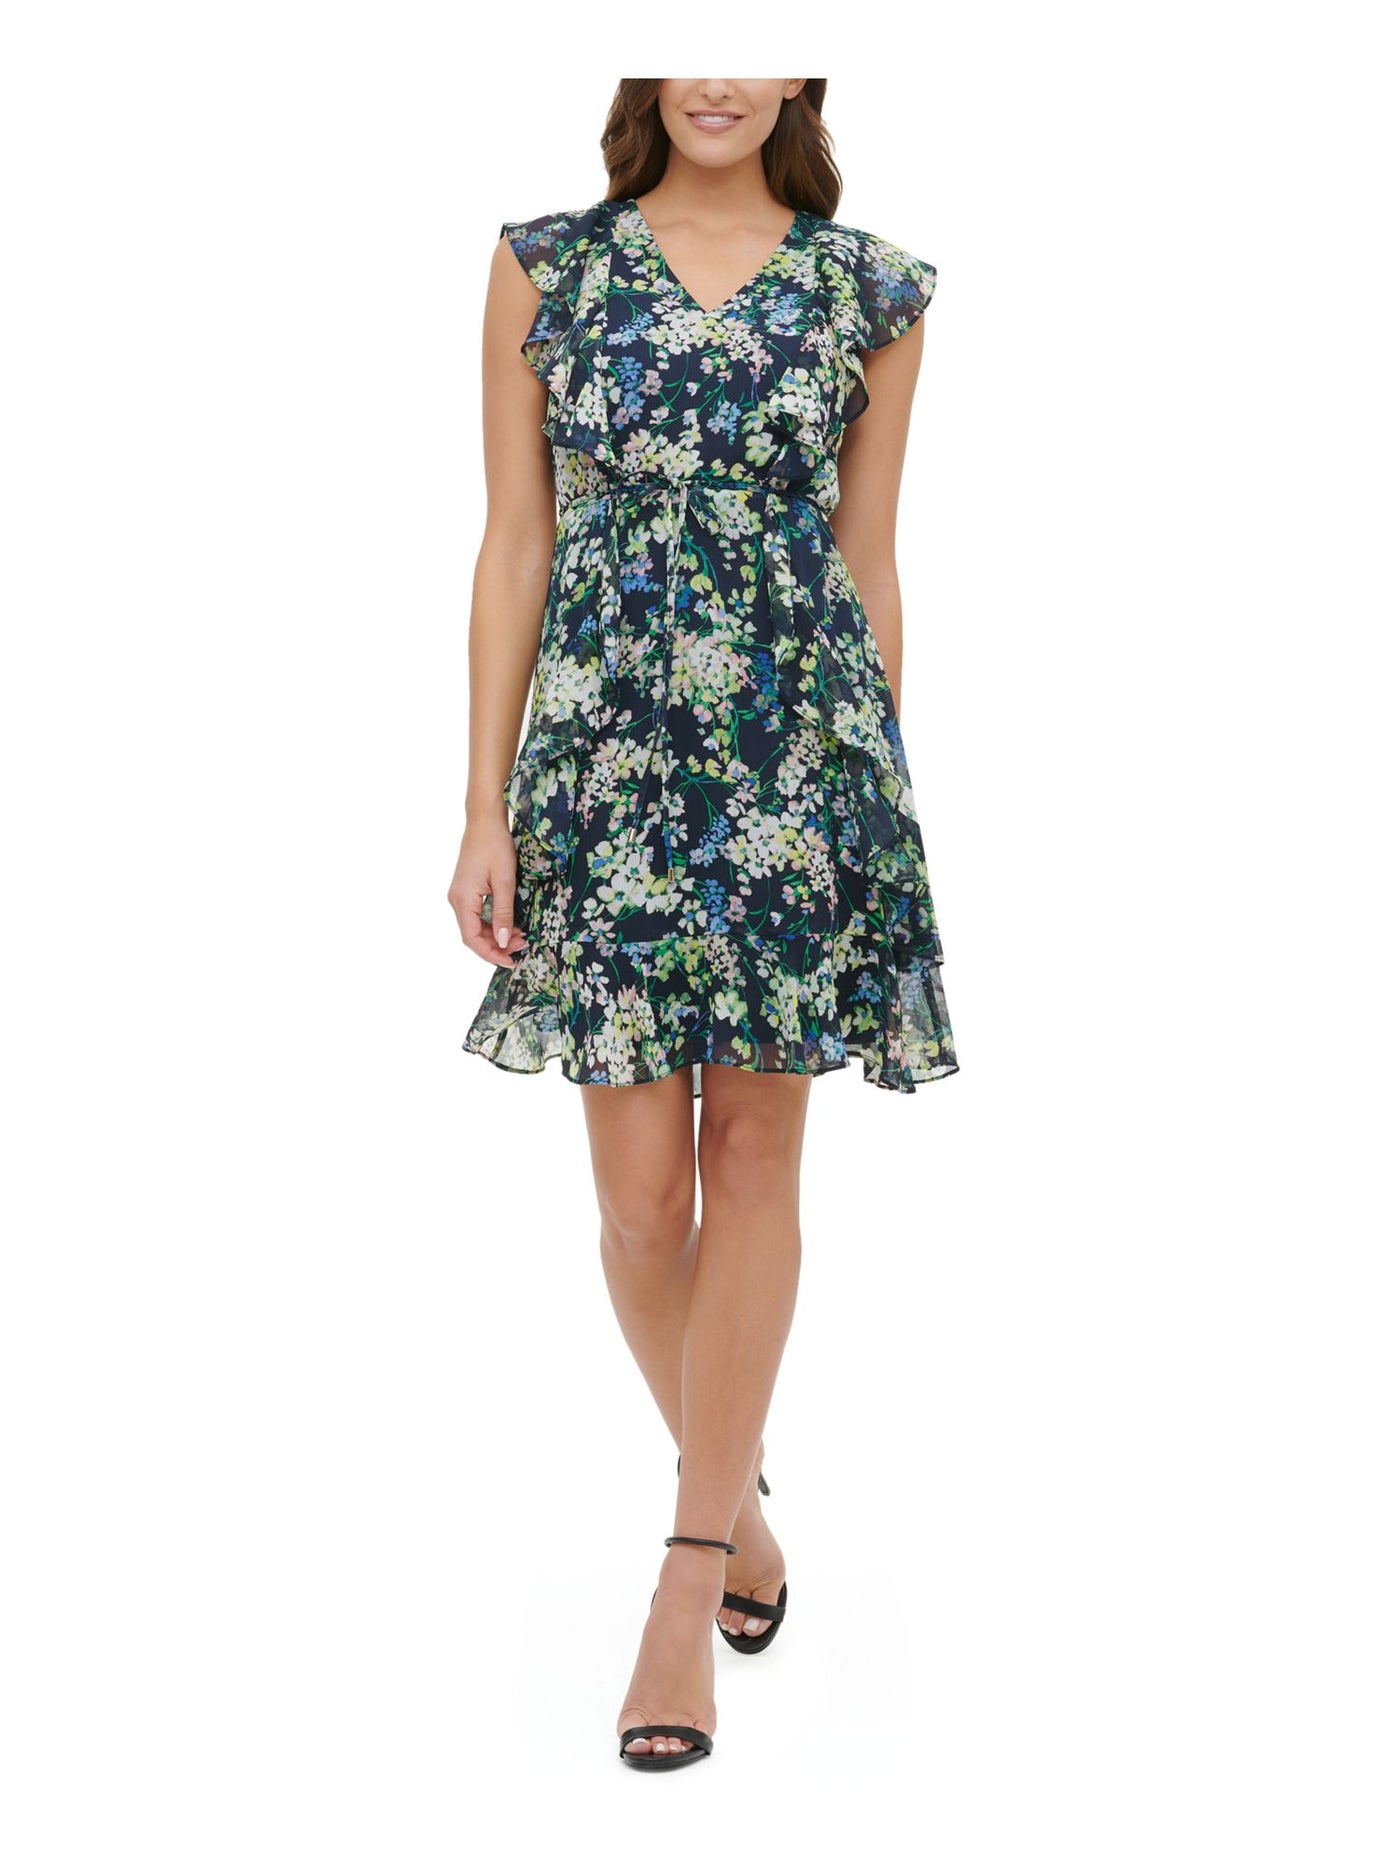 TOMMY HILFIGER Womens Navy Ruffled Tie Zippered Floral Cap Sleeve V Neck Short Fit + Flare Dress 4